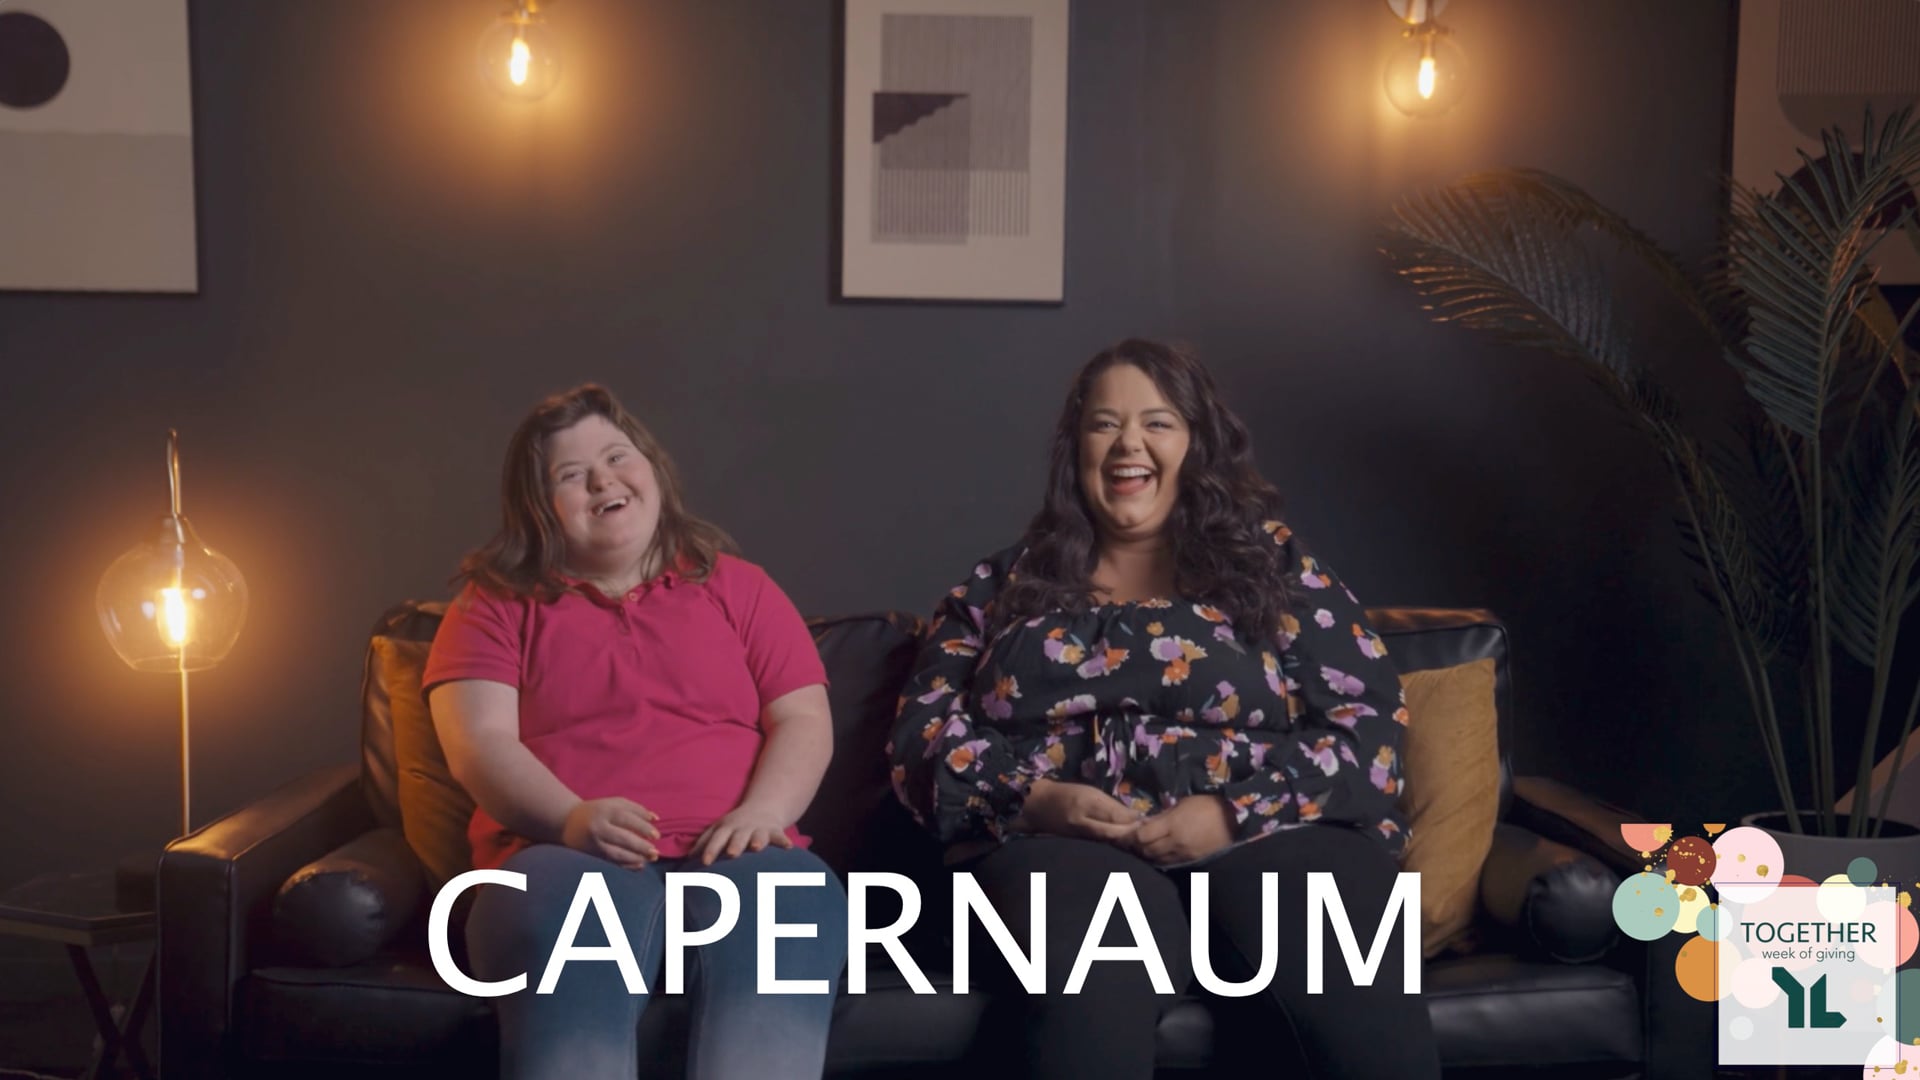 2022 TOGETHER Week Of Giving - Capernaum